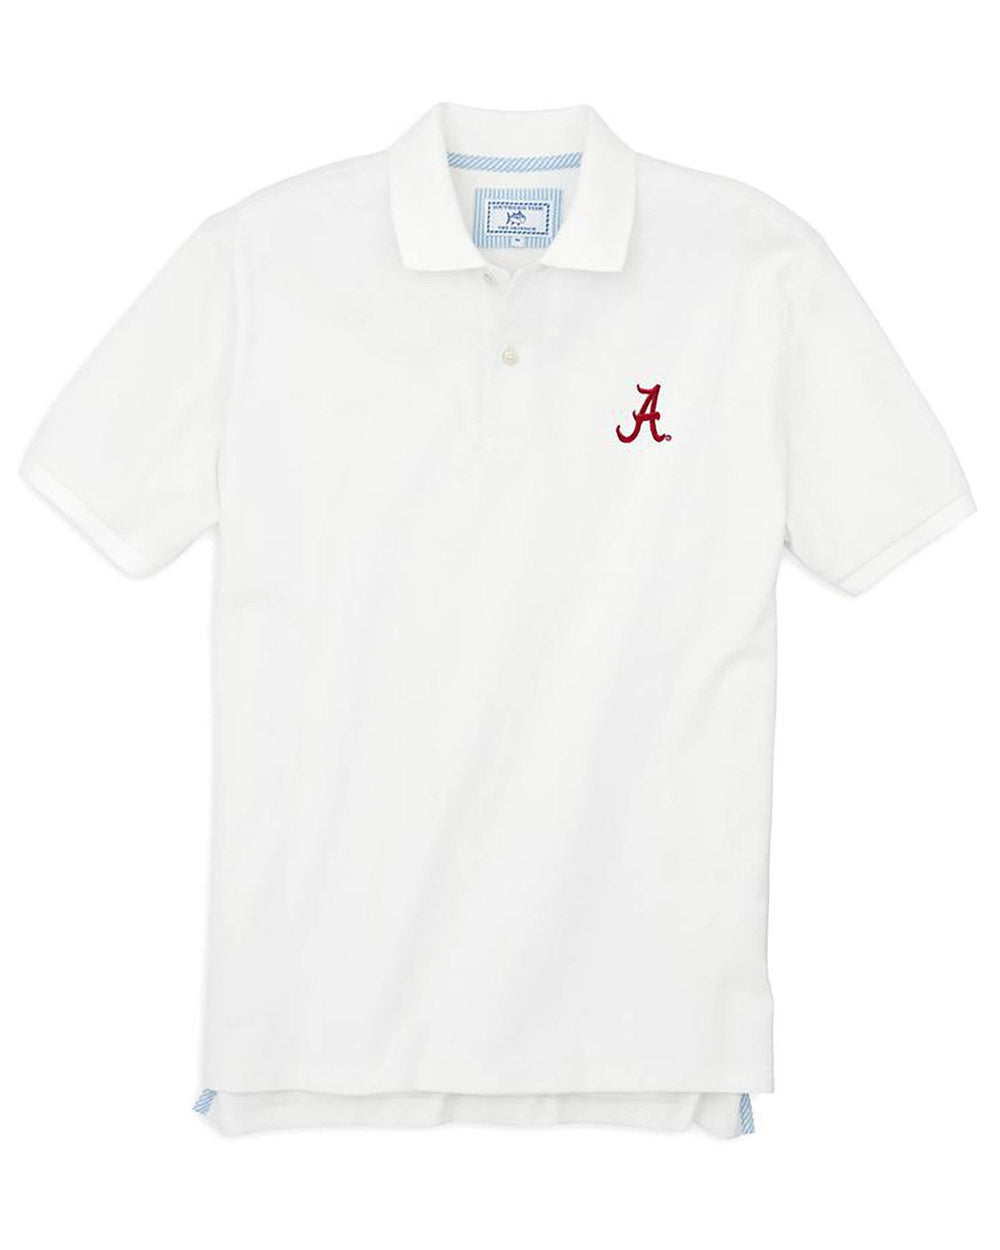 The front view of the Men's White Alabama Crimson Tide Pique Polo Shirt by Southern Tide - Classic White